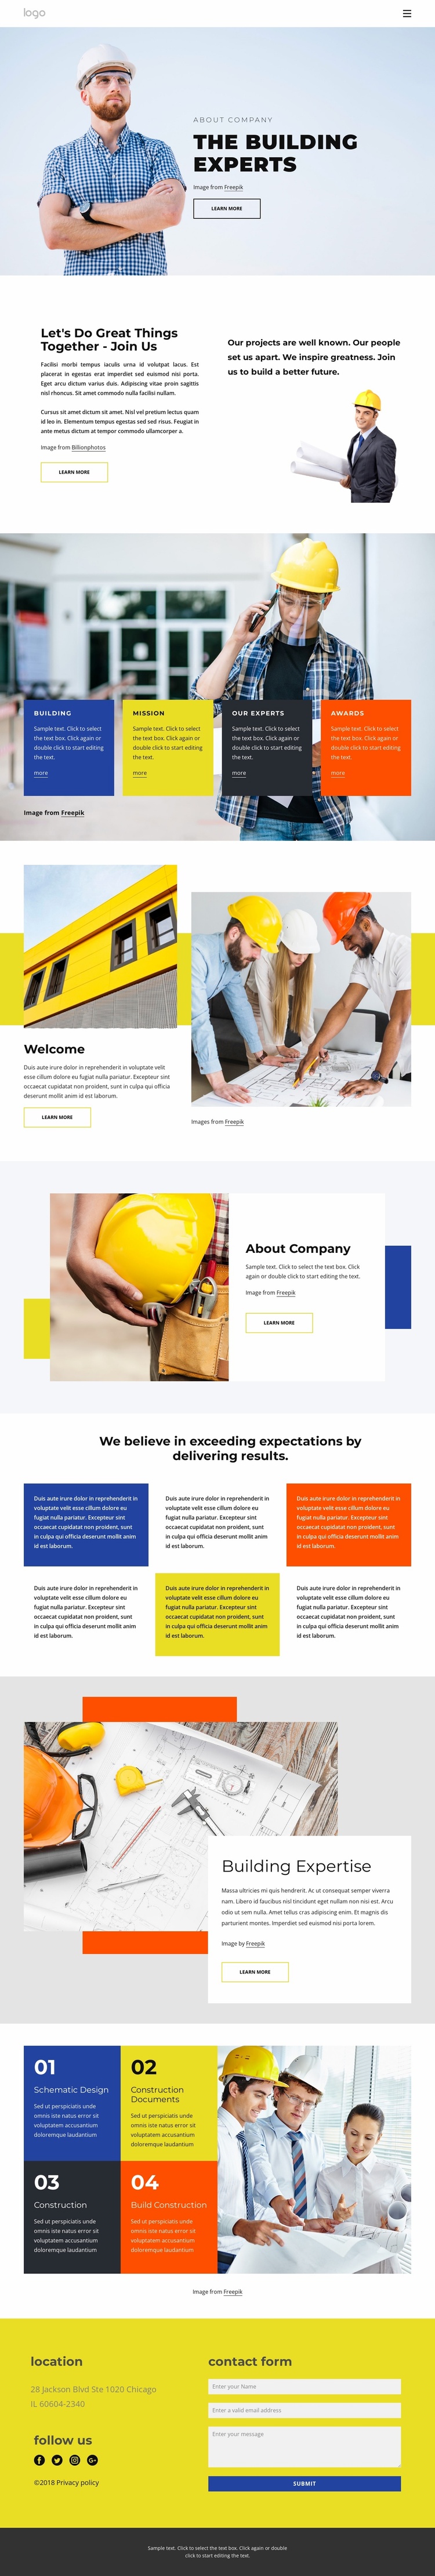 Building experts company Website Template